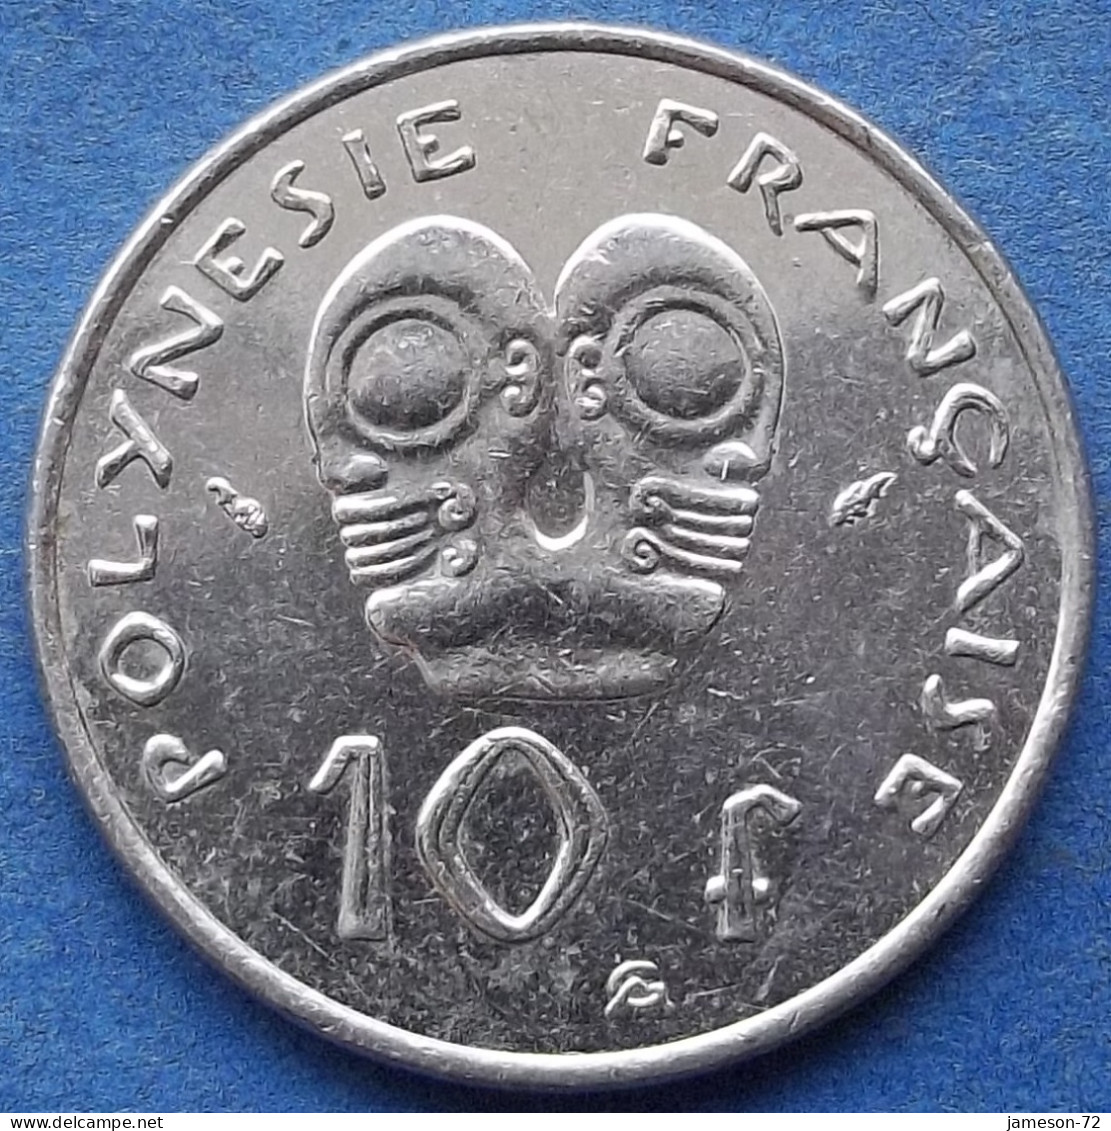 FRENCH POLYNESIA - 10 Francs 1991 KM# 8 French Overseas Territory - Edelweiss Coins - Polynésie Française